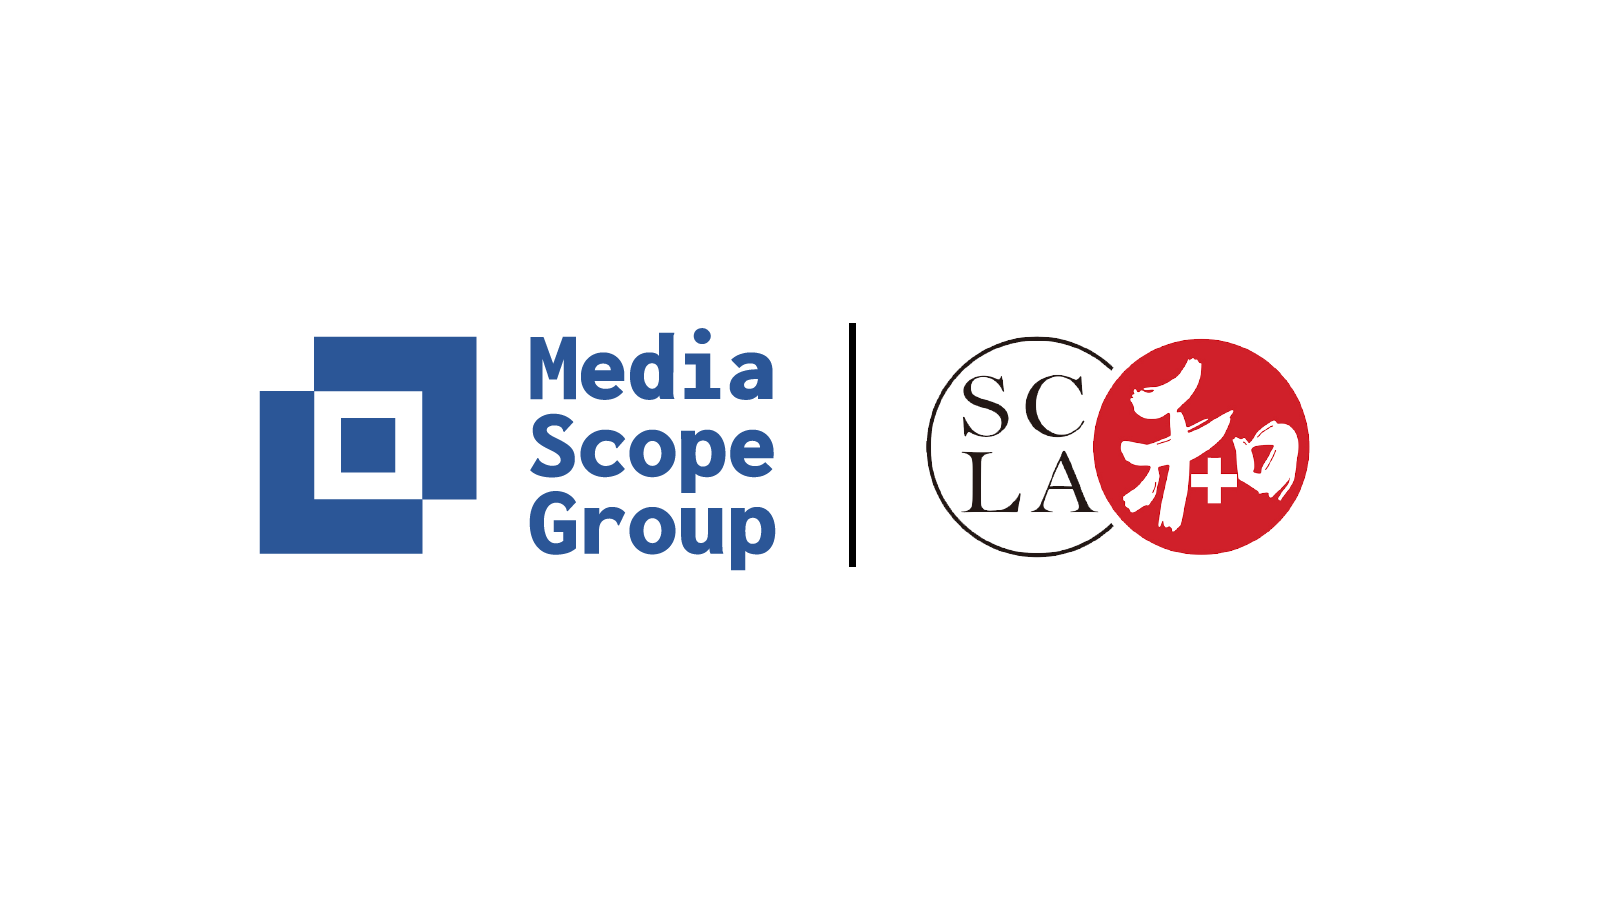 Media Scope Group and Swiss Chinese Law Association forms strategic partnership